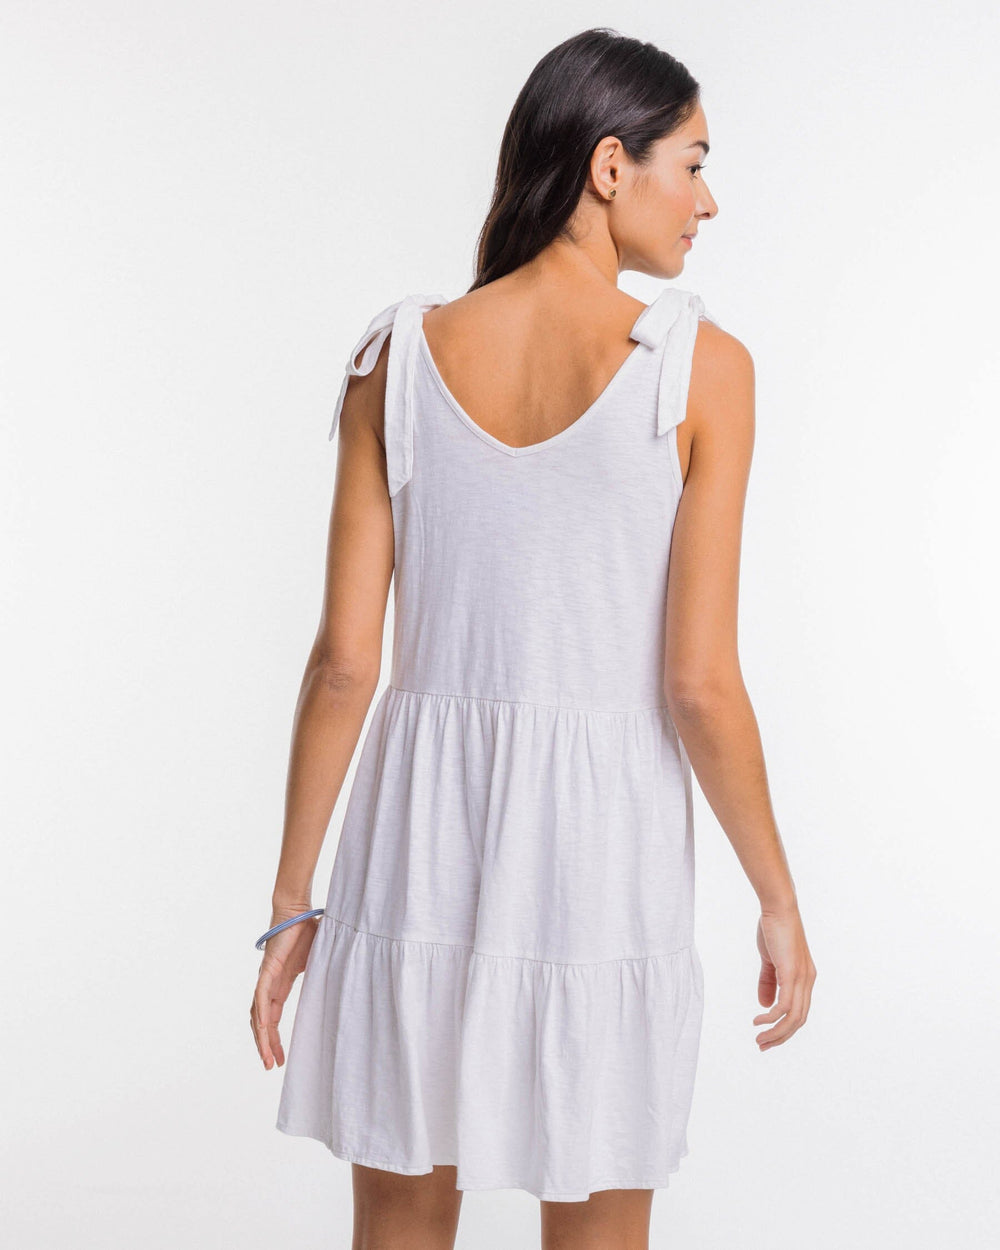 The back view of the Southern Tide Nicole Sun Farer Tiered Tank Dress by Southern Tide - Classic White